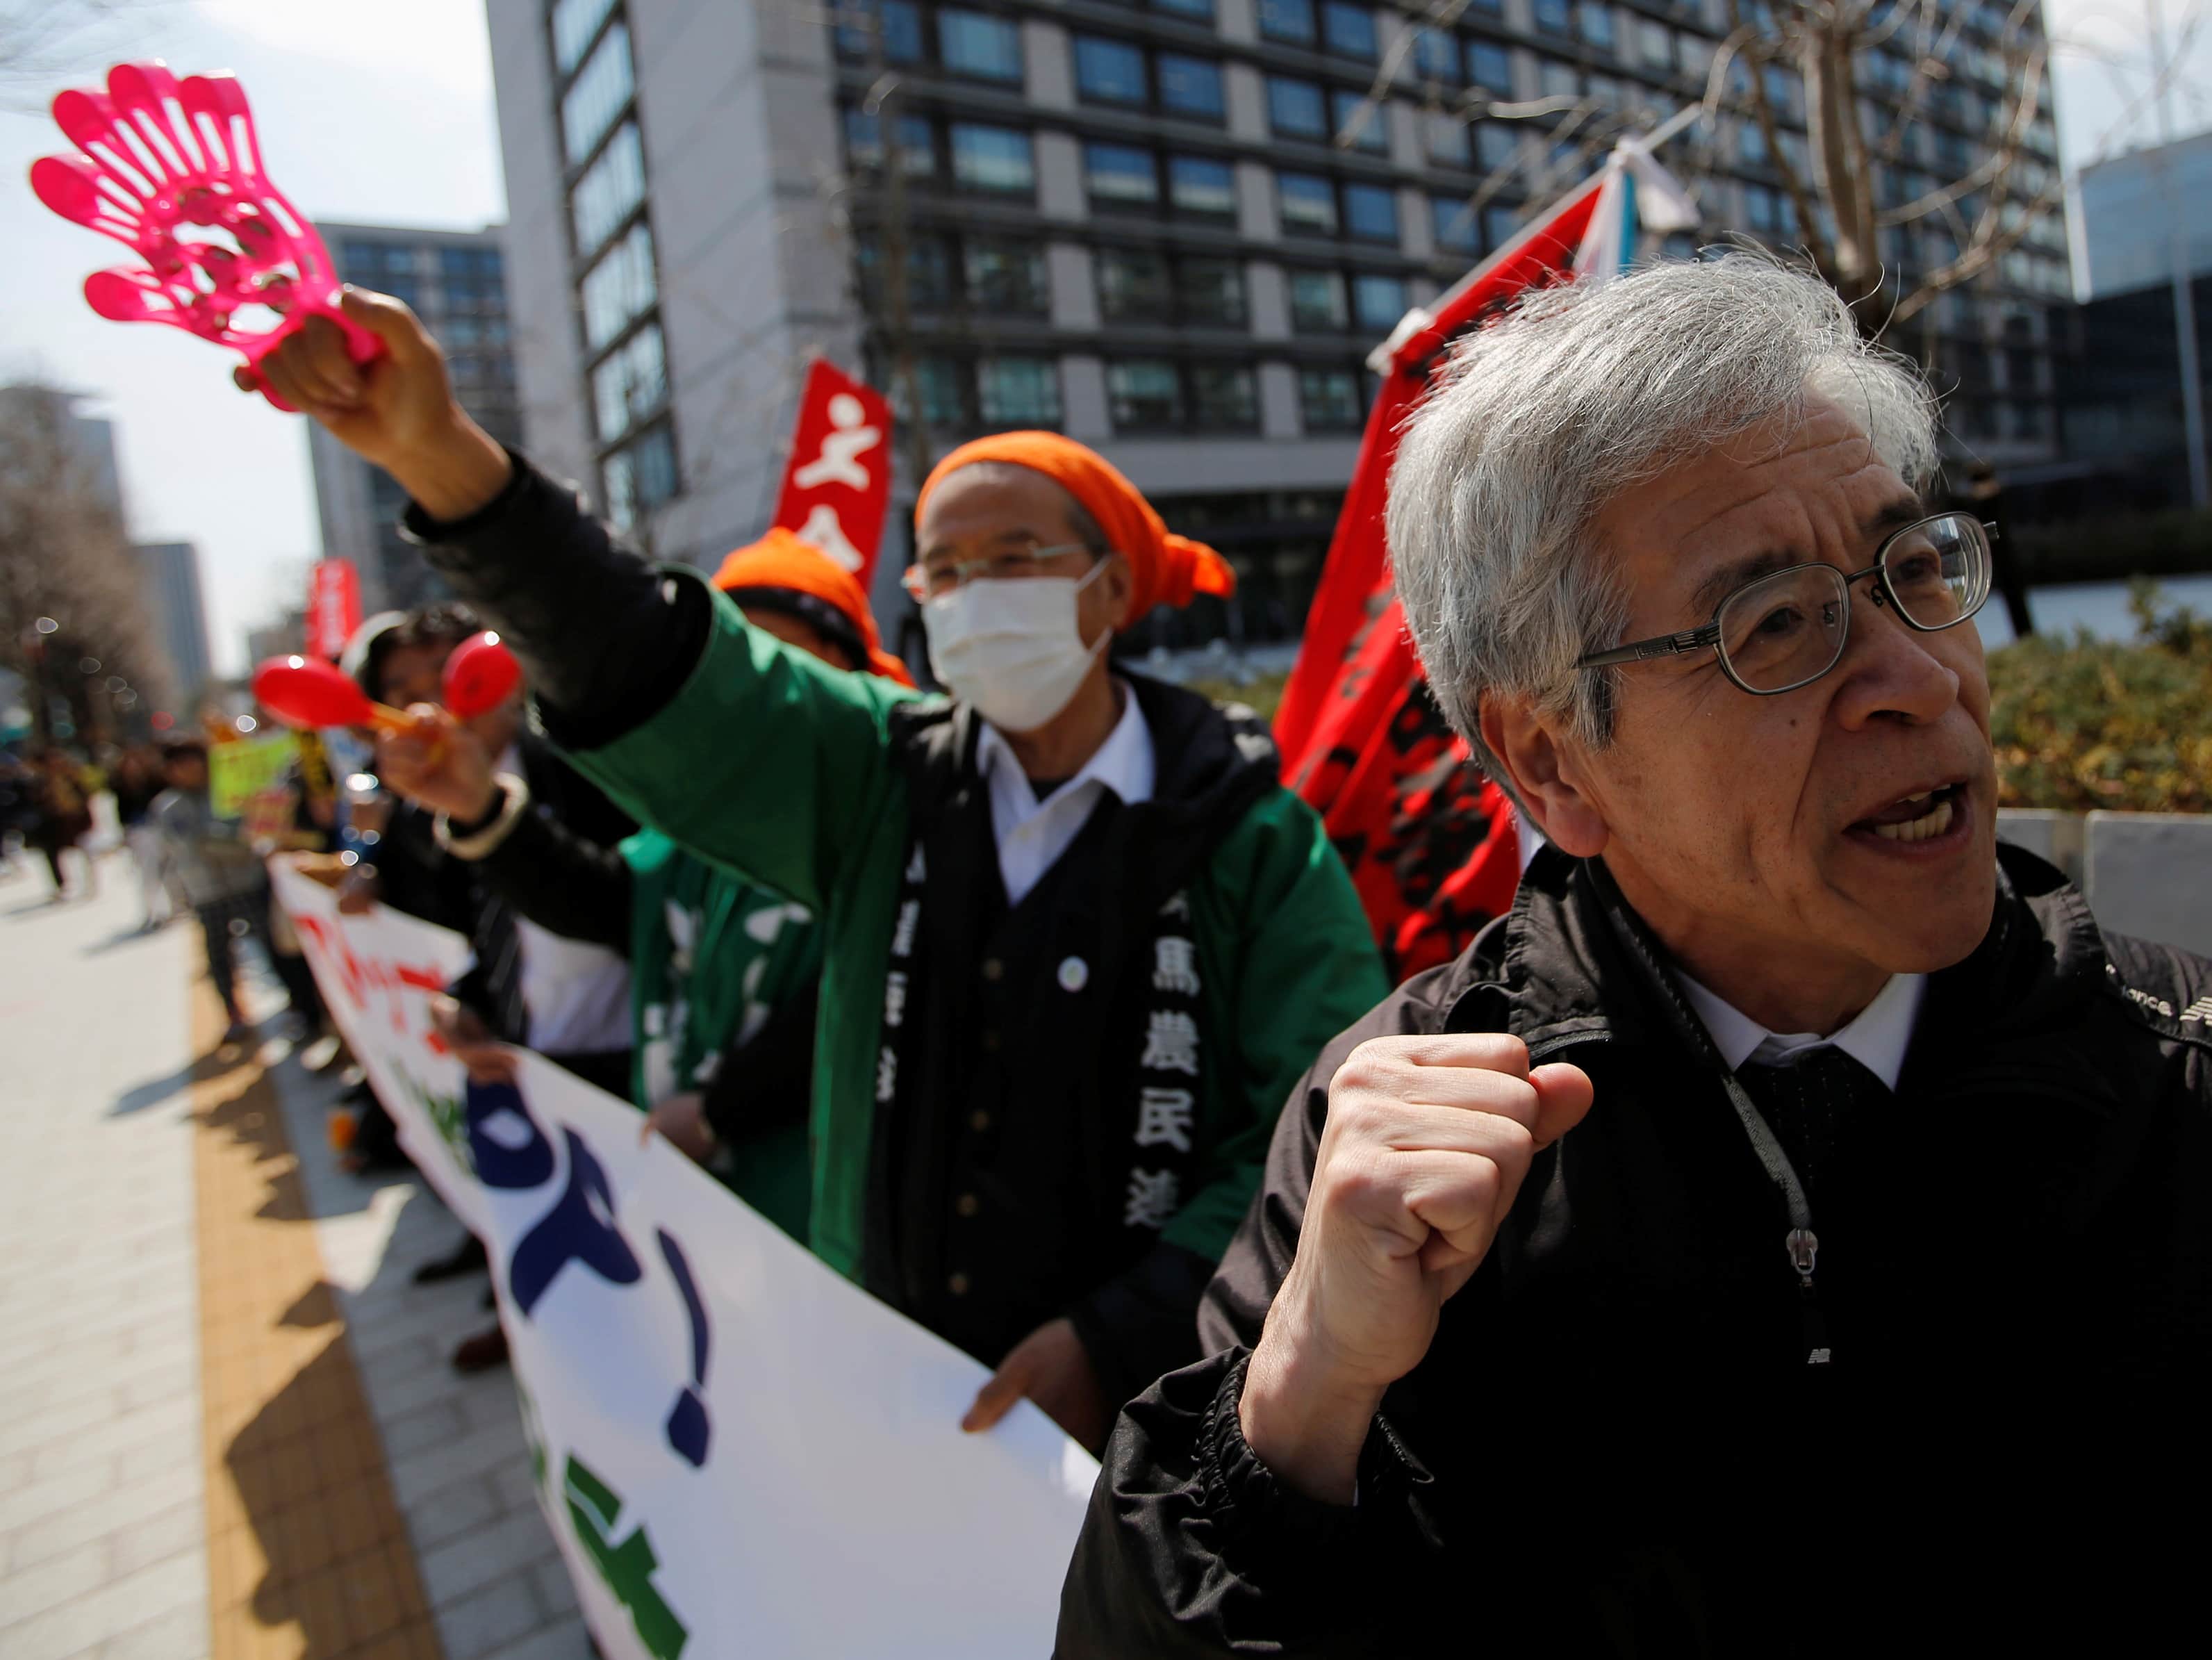 Protesters at a rally against Japan participating in rule-making negotiations for the Trans-Pacific Partnership (TPP) in front of the parliament in Tokyo, 15 March 2013, REUTERS/Issei Kato